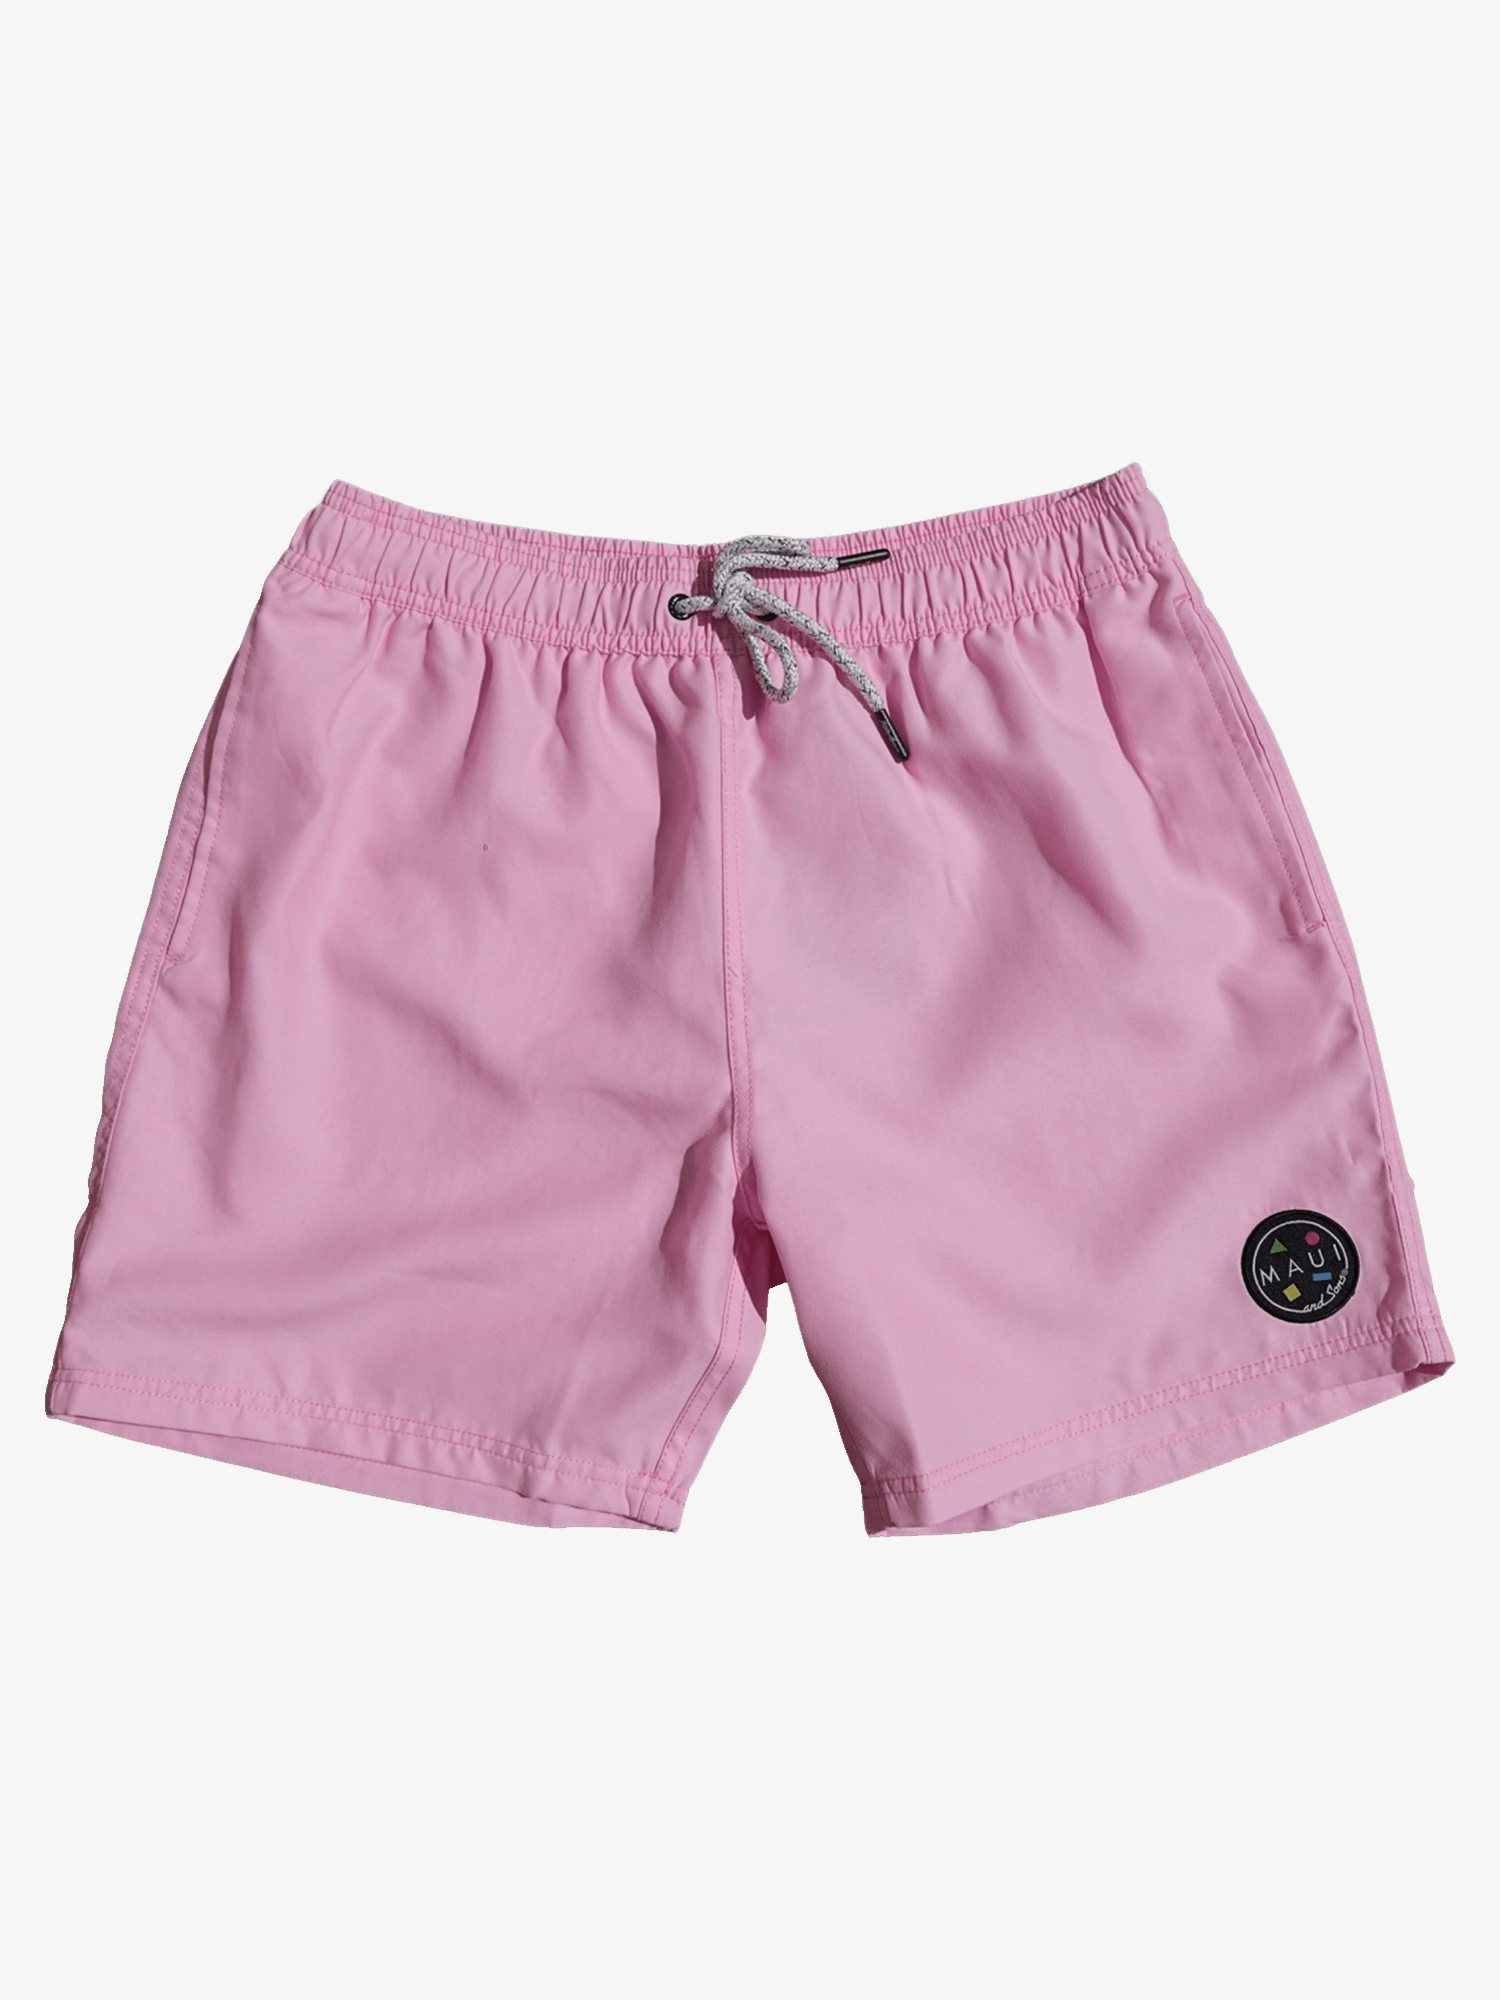 Maui & Sons Party On Pool Swim Trunks